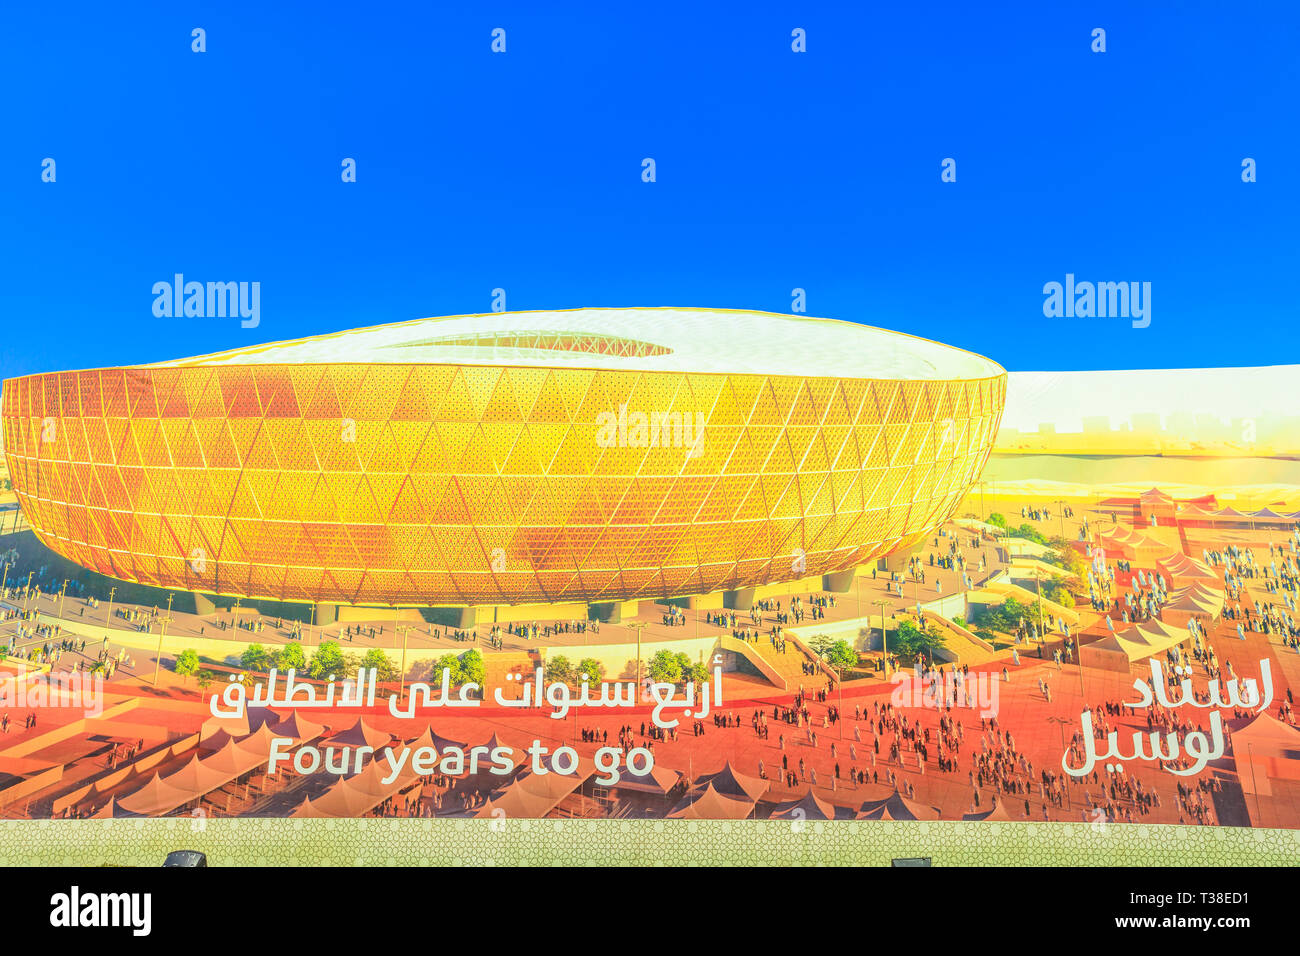 Lusail City, Qatar - February 21, 2019: billboard of the prototype of the futuristic Lusail Stadium in Lusail City for the 2022 World Cup. It'll be Stock Photo